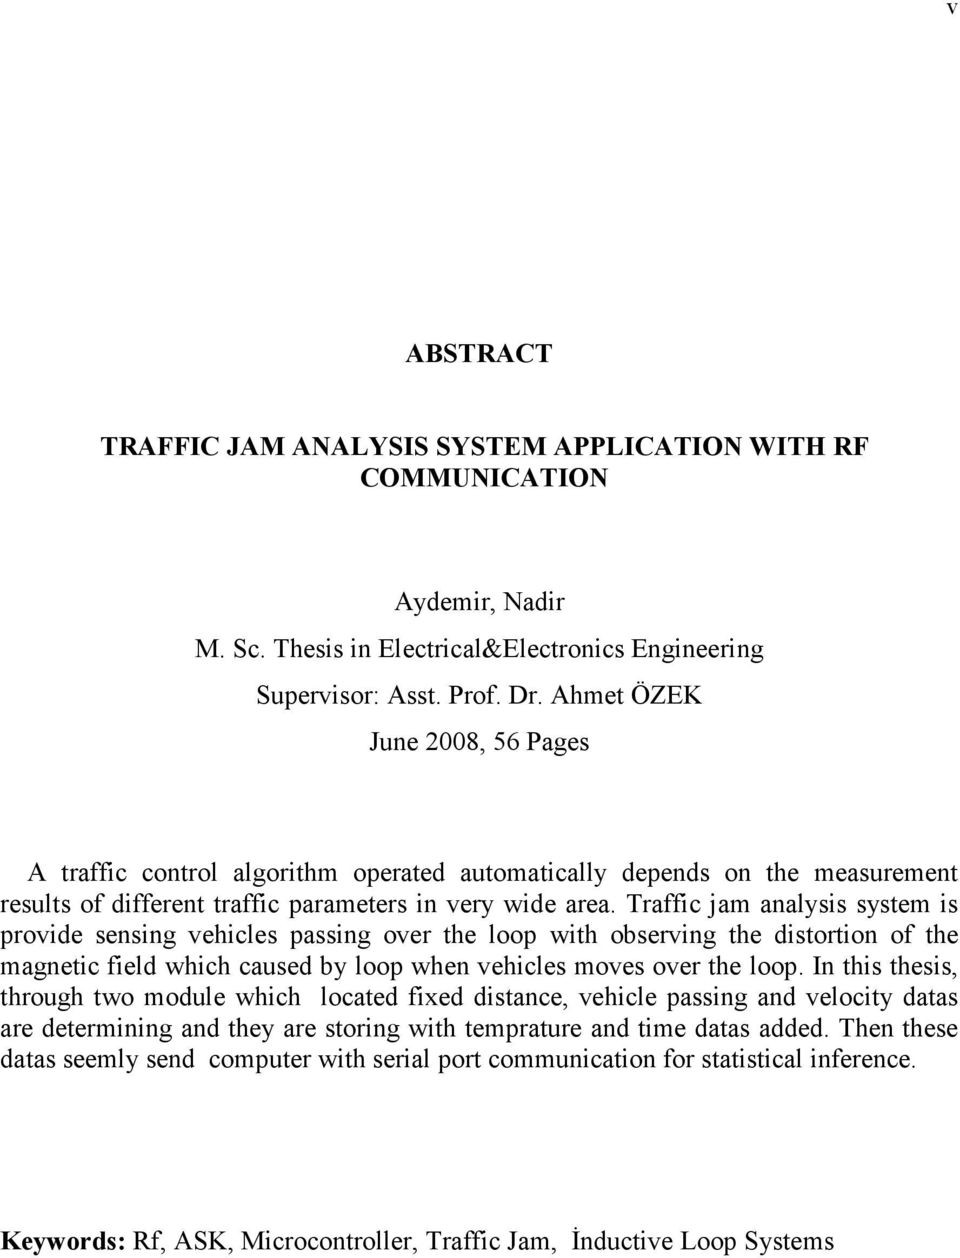 Traffic jam analysis system is provide sensing vehicles passing over the loop with observing the distortion of the magnetic field which caused by loop when vehicles moves over the loop.